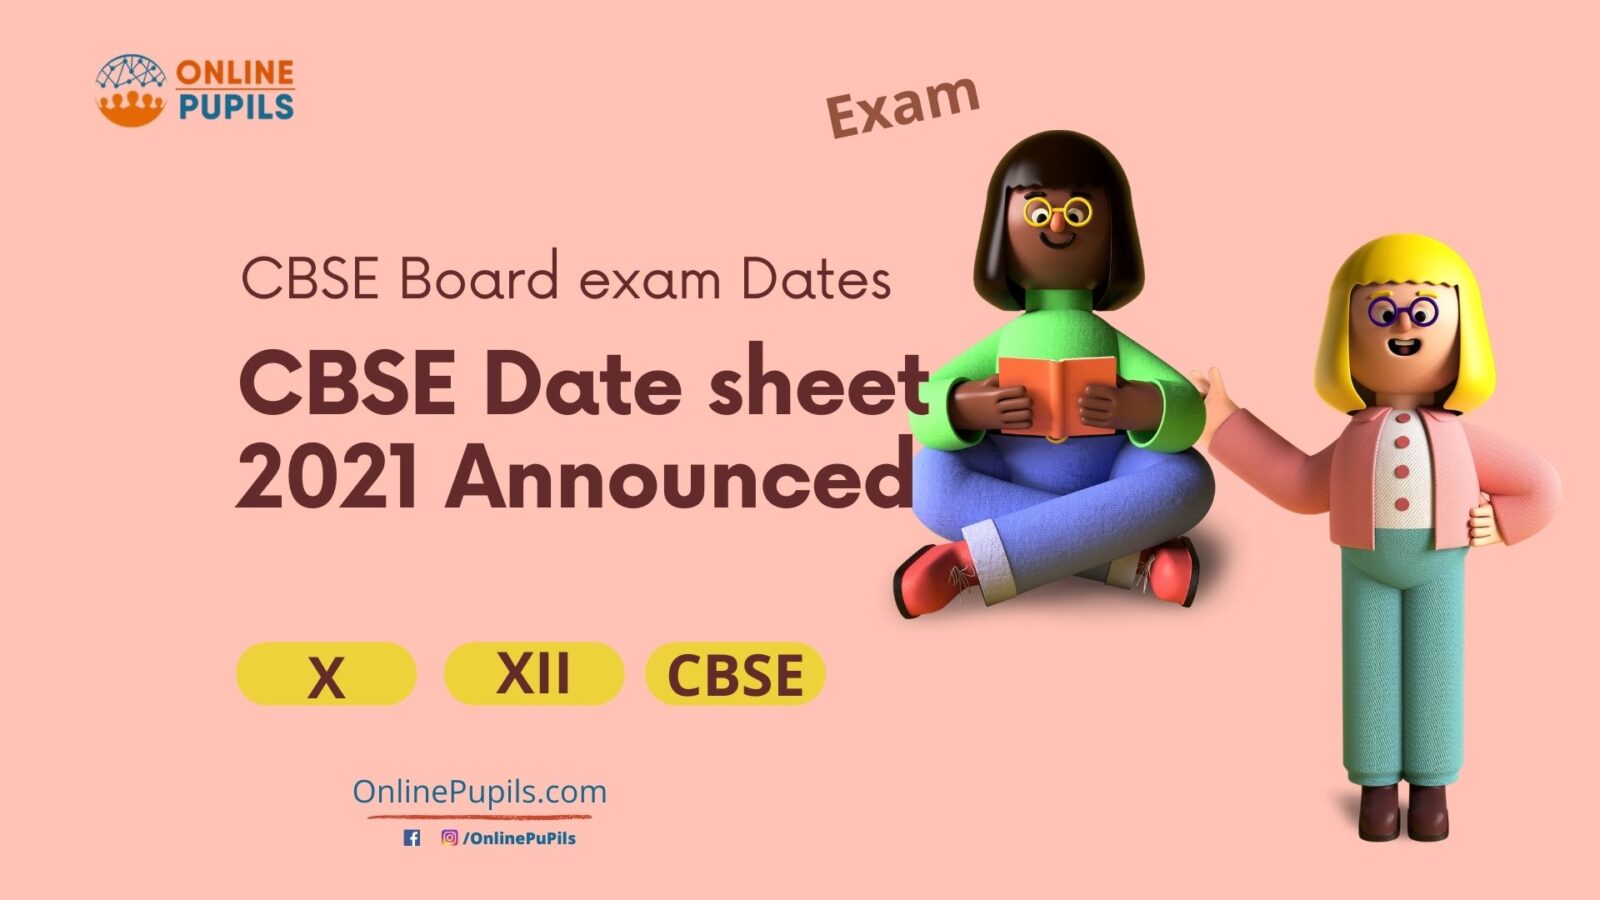 cbse-date-sheet-2021-announced-10th-and-12th-board-exam-dates-onlinepupils